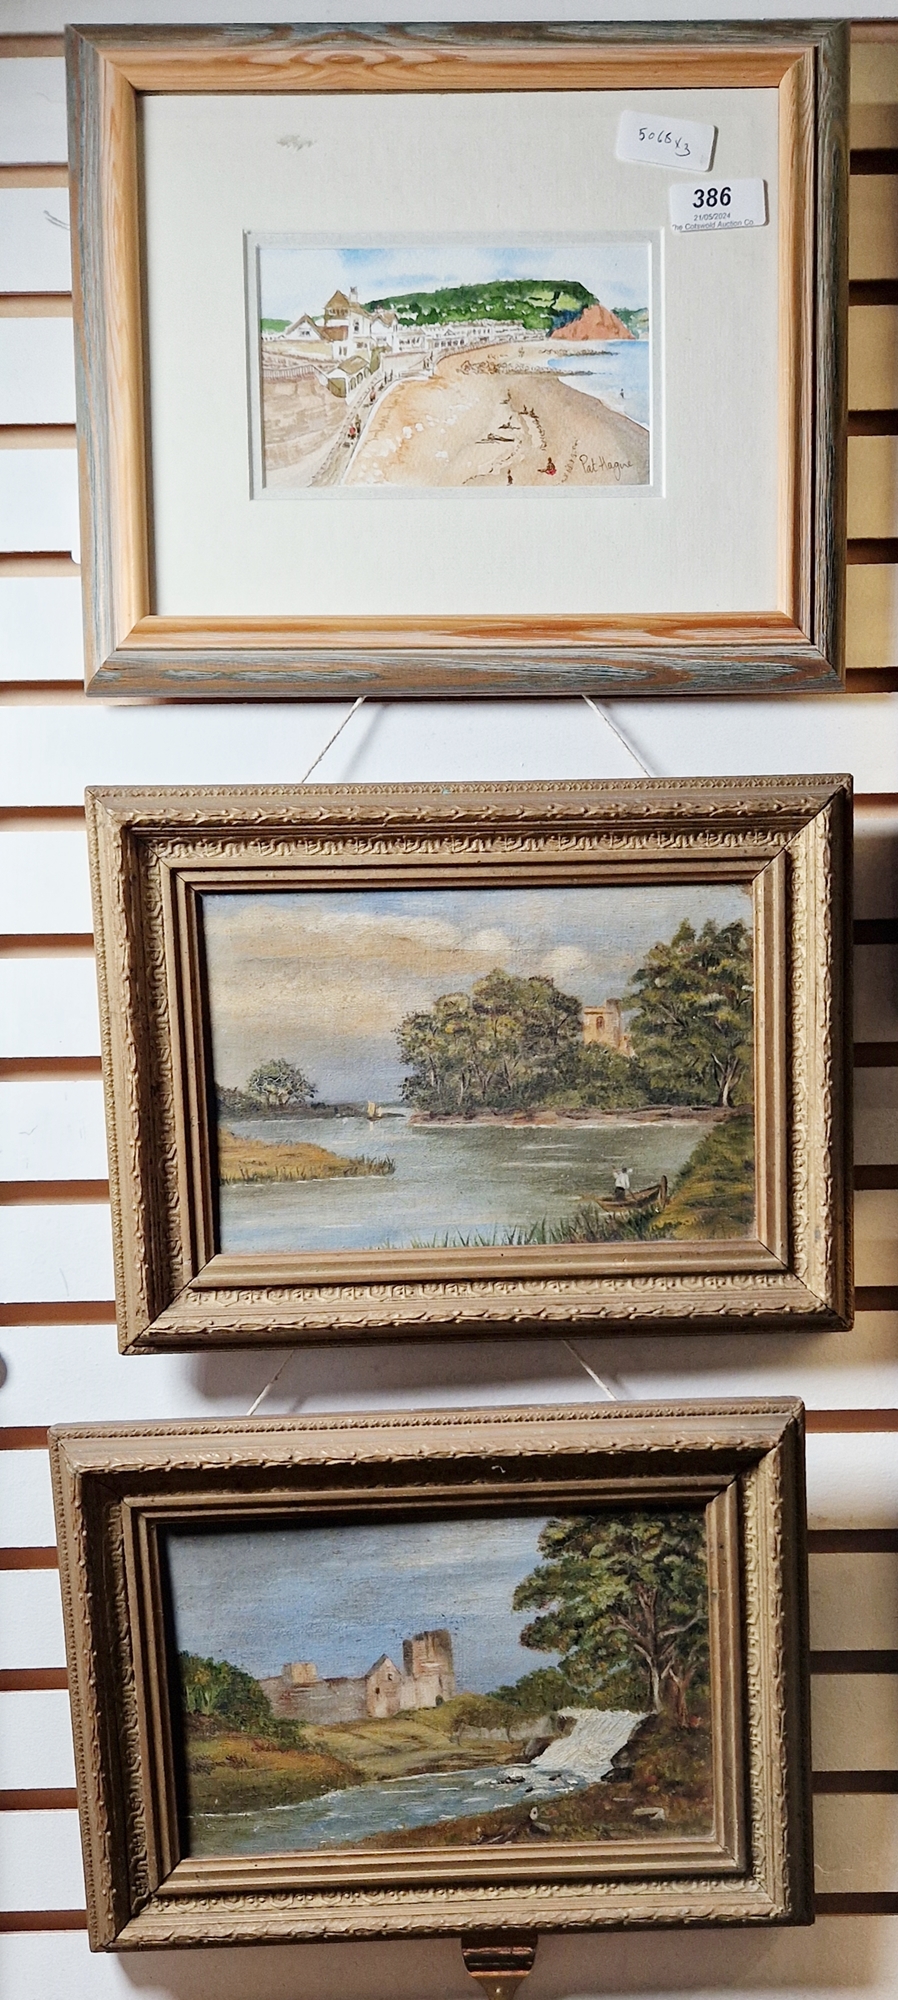 Pair of 19th century British School Oils on canvas Each with a river landscape Signed MJ Edwards & K - Image 4 of 4